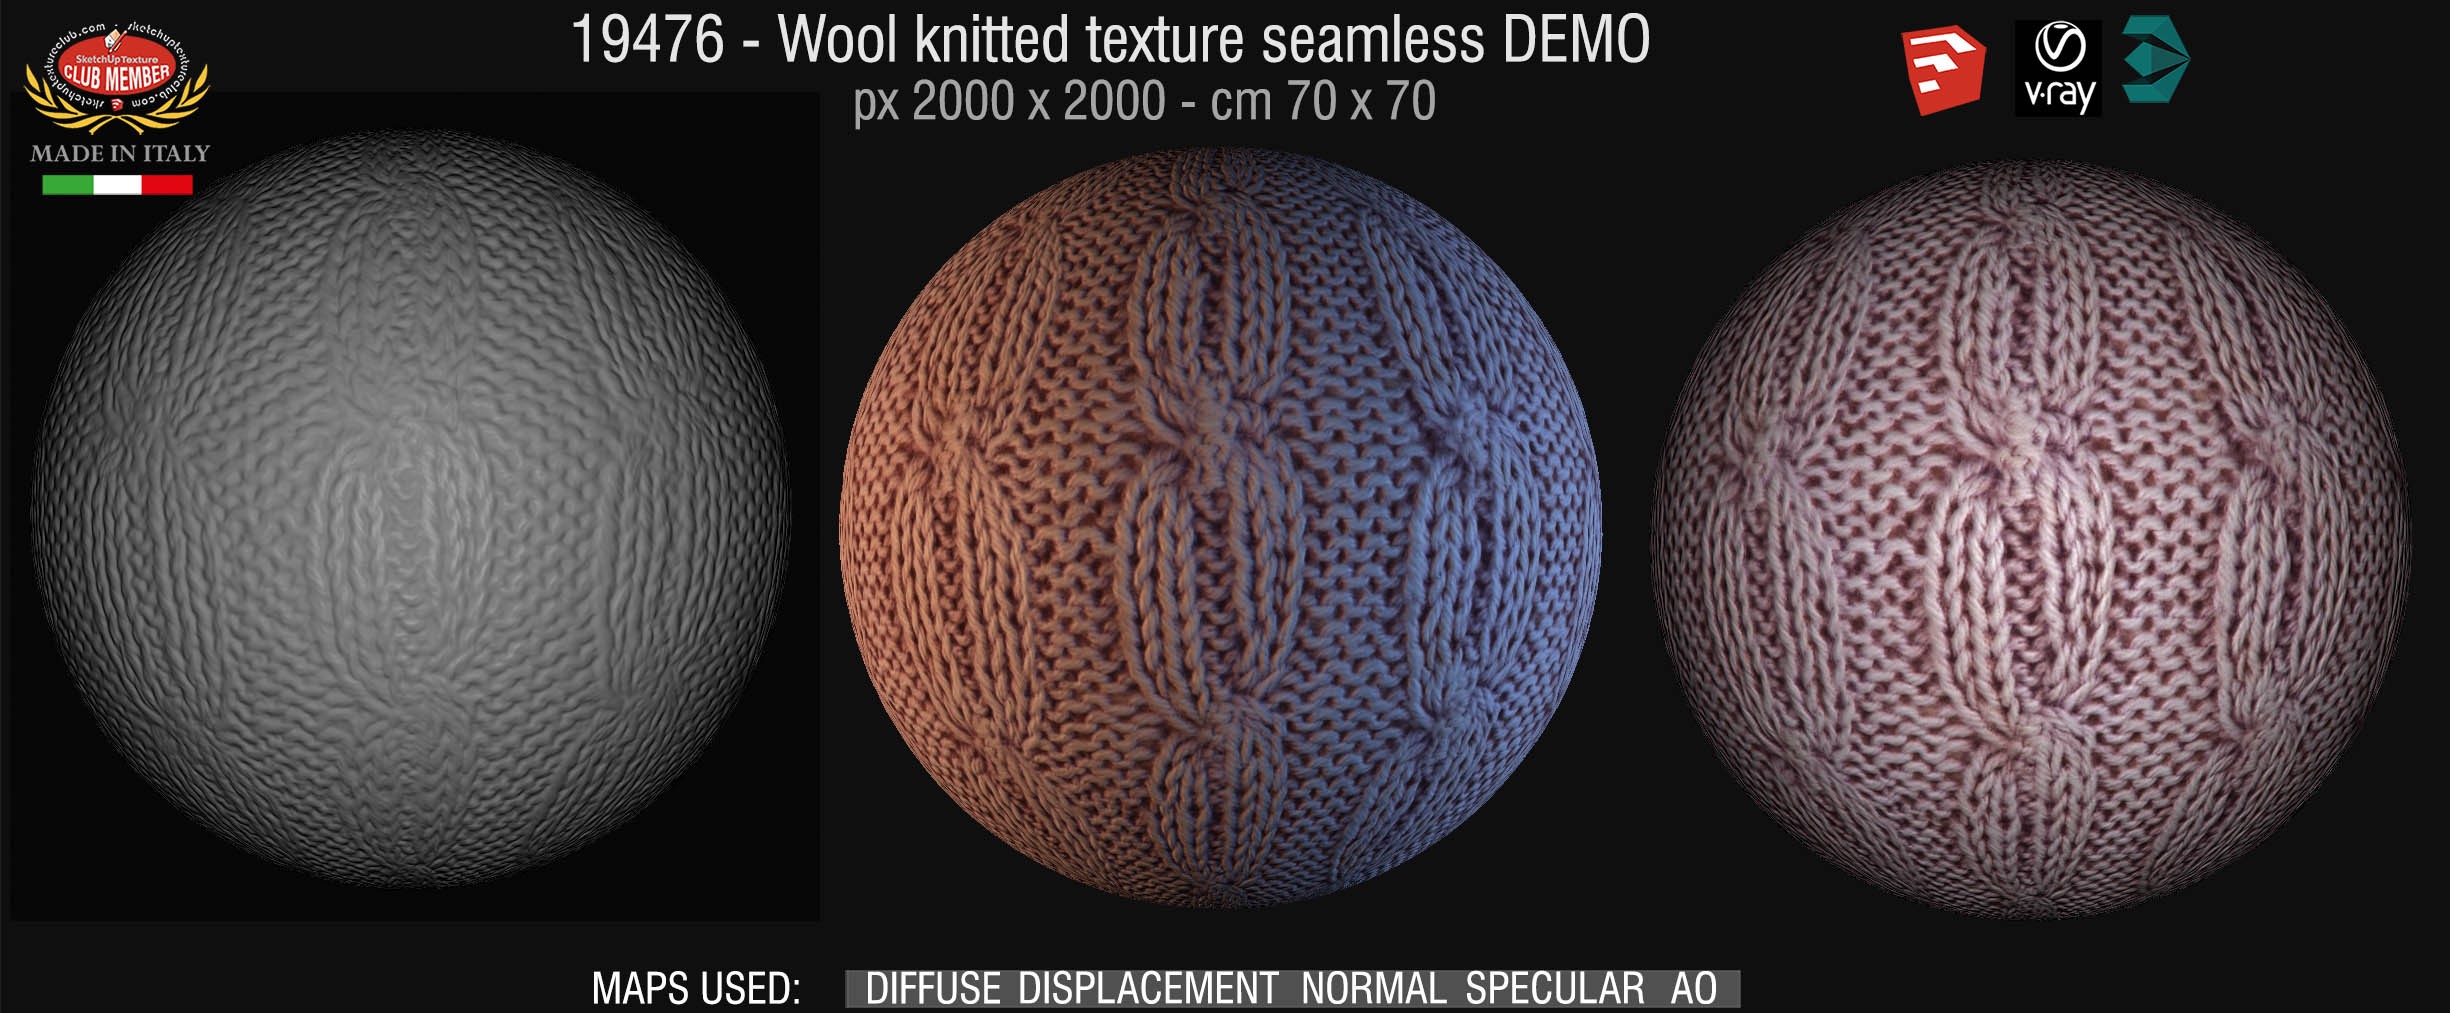 19476 Wool knitted texture seamless + maps DEMO